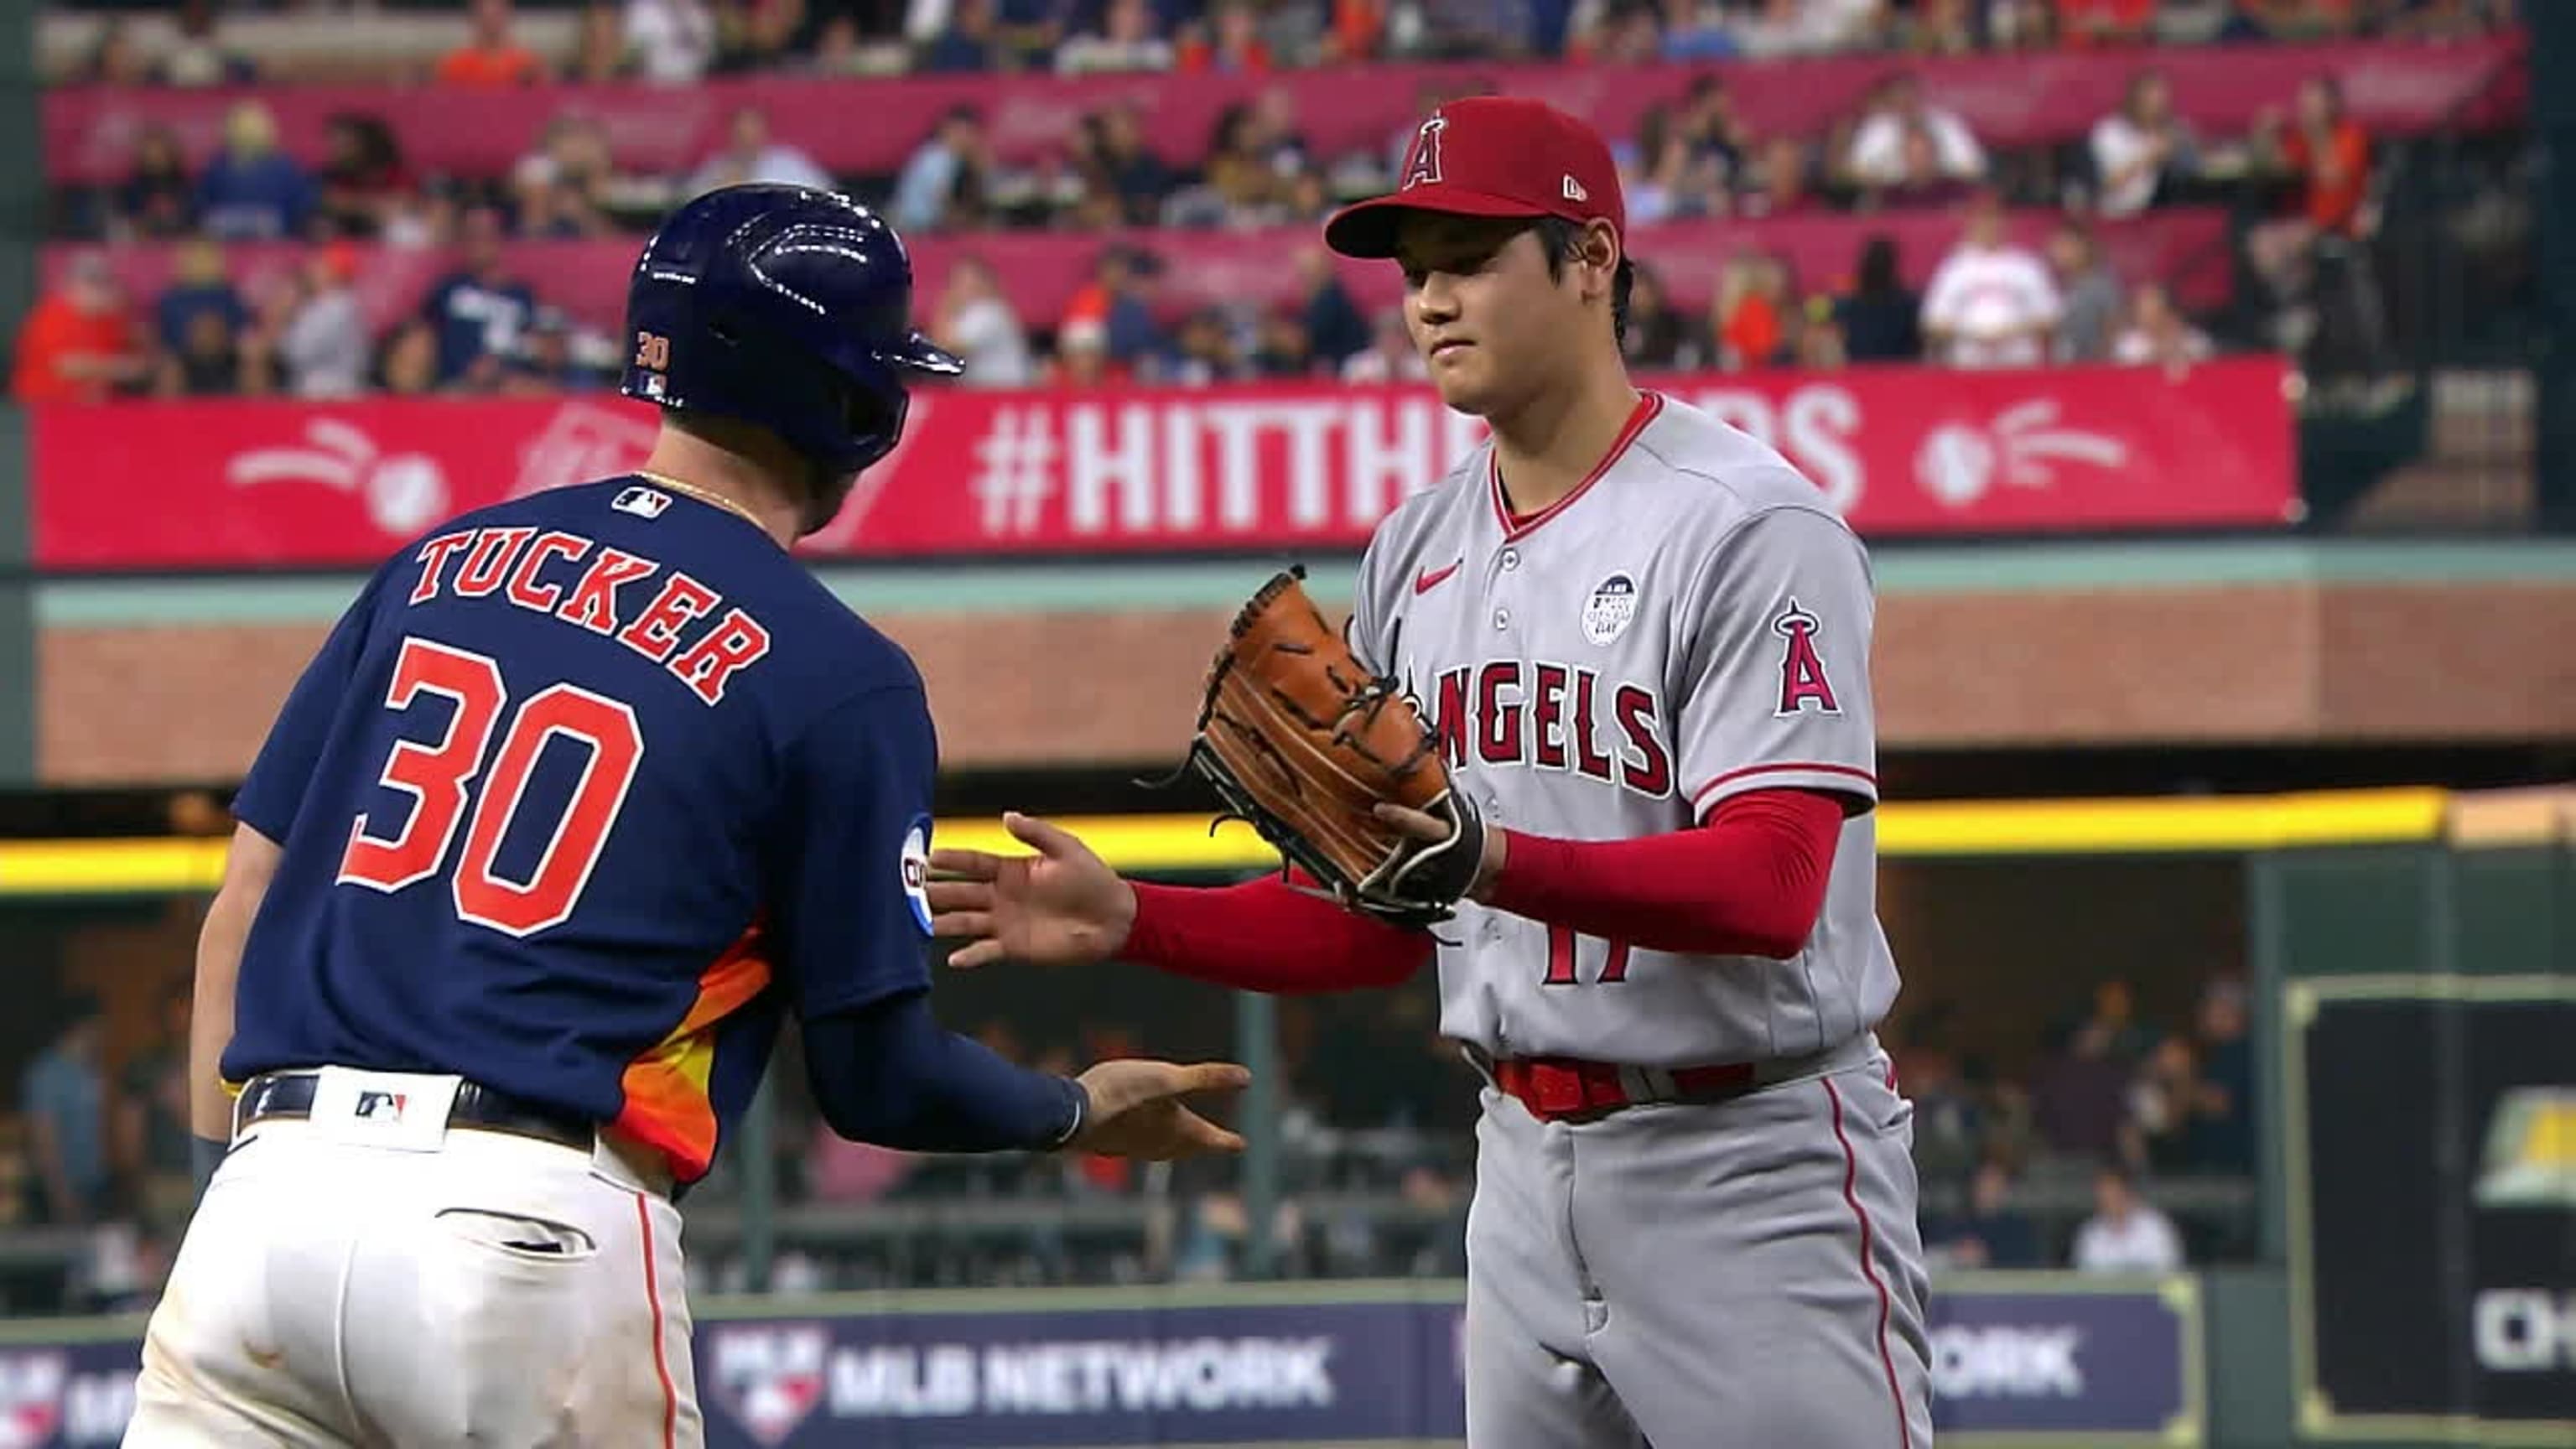 Shohei Ohtani allows 4 earned runs, takes the loss in the Astros